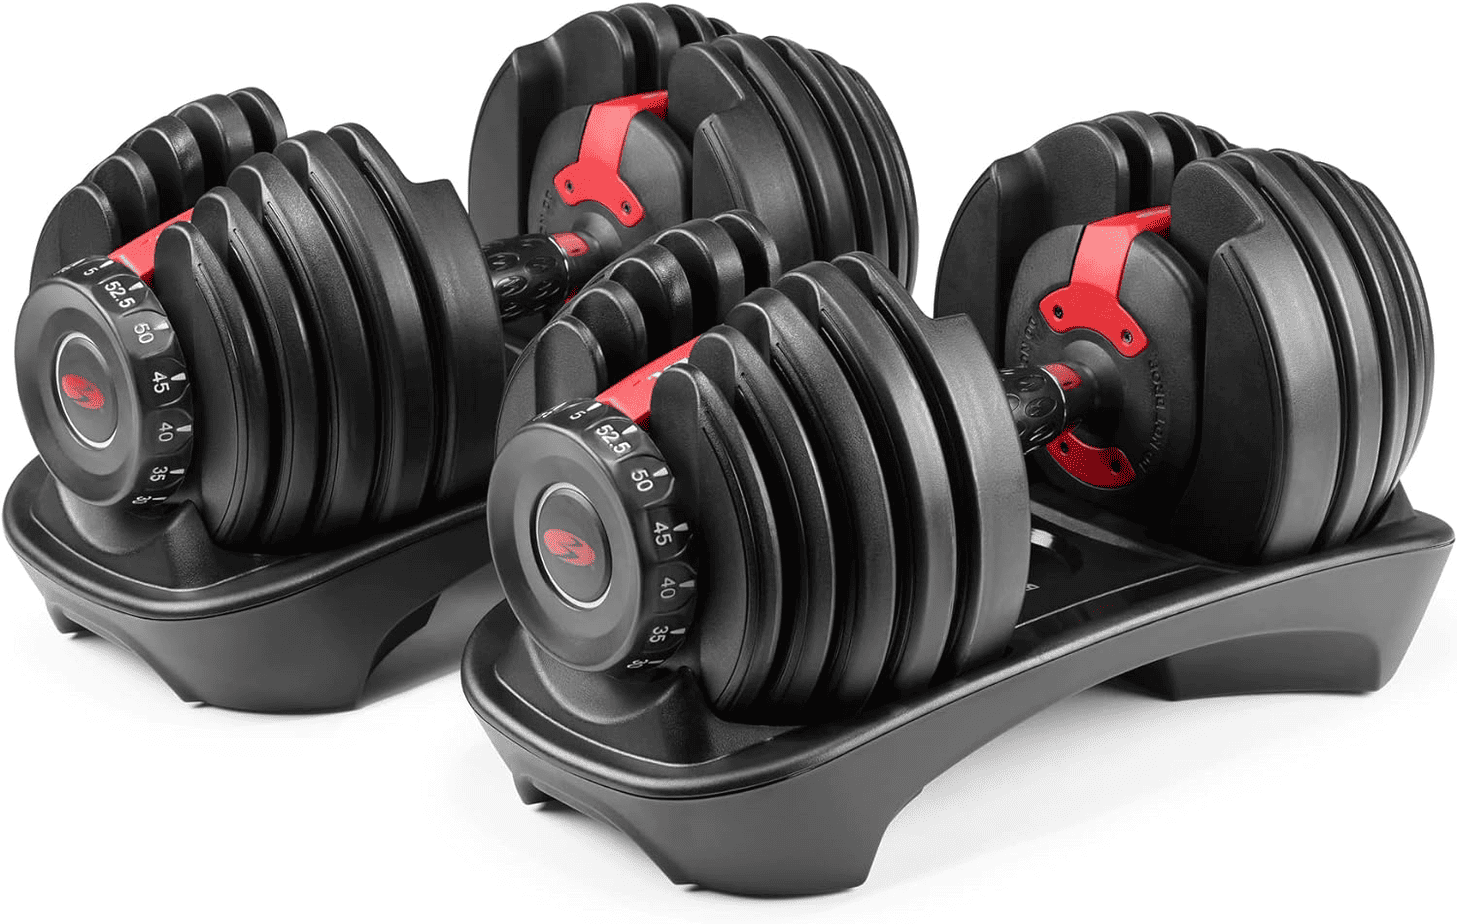 Image Of Bowflex Selecttech 552 Adjustable Dumbbells, Lighter Weights Than Traditional Dumbbells